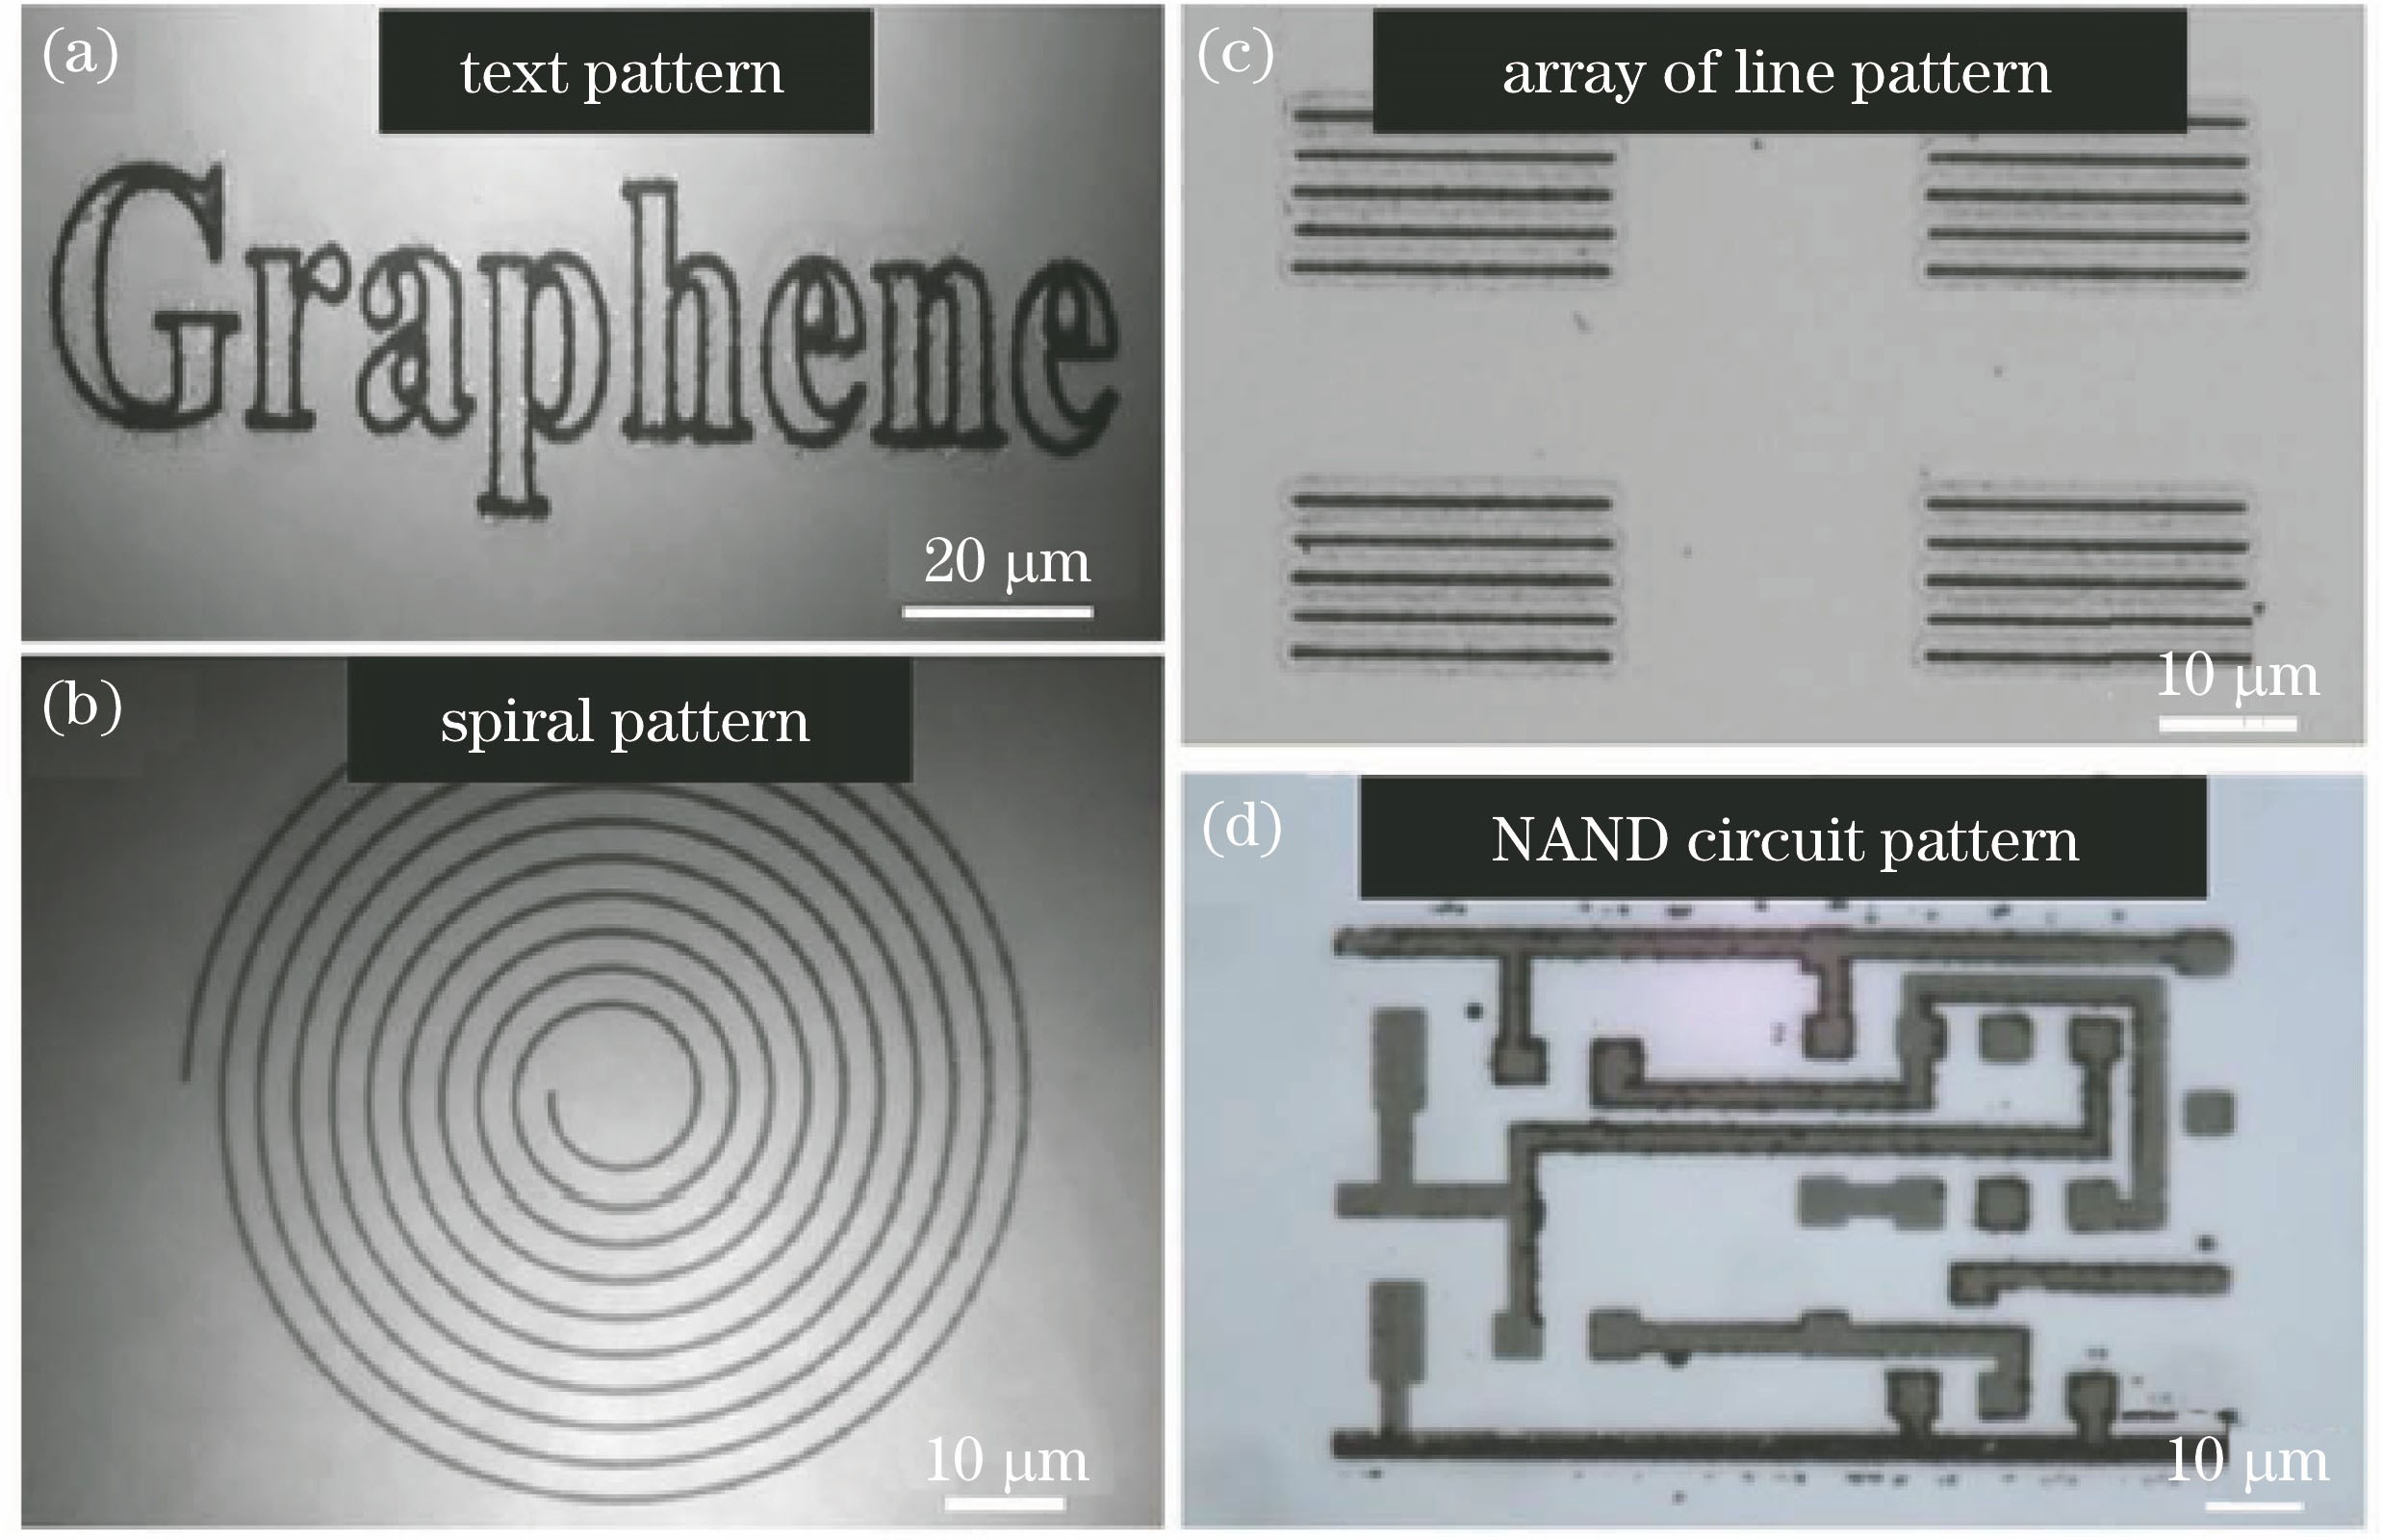 Micro-nano structure of graphene film. (a) Graphene text pattern on a glass substrate; (b) graphene spiral pattern on a glass substrate; (c) arrays of graphene lines on a glass substrate; (d) circuit pattern on a SiO2/Si substrate[22]